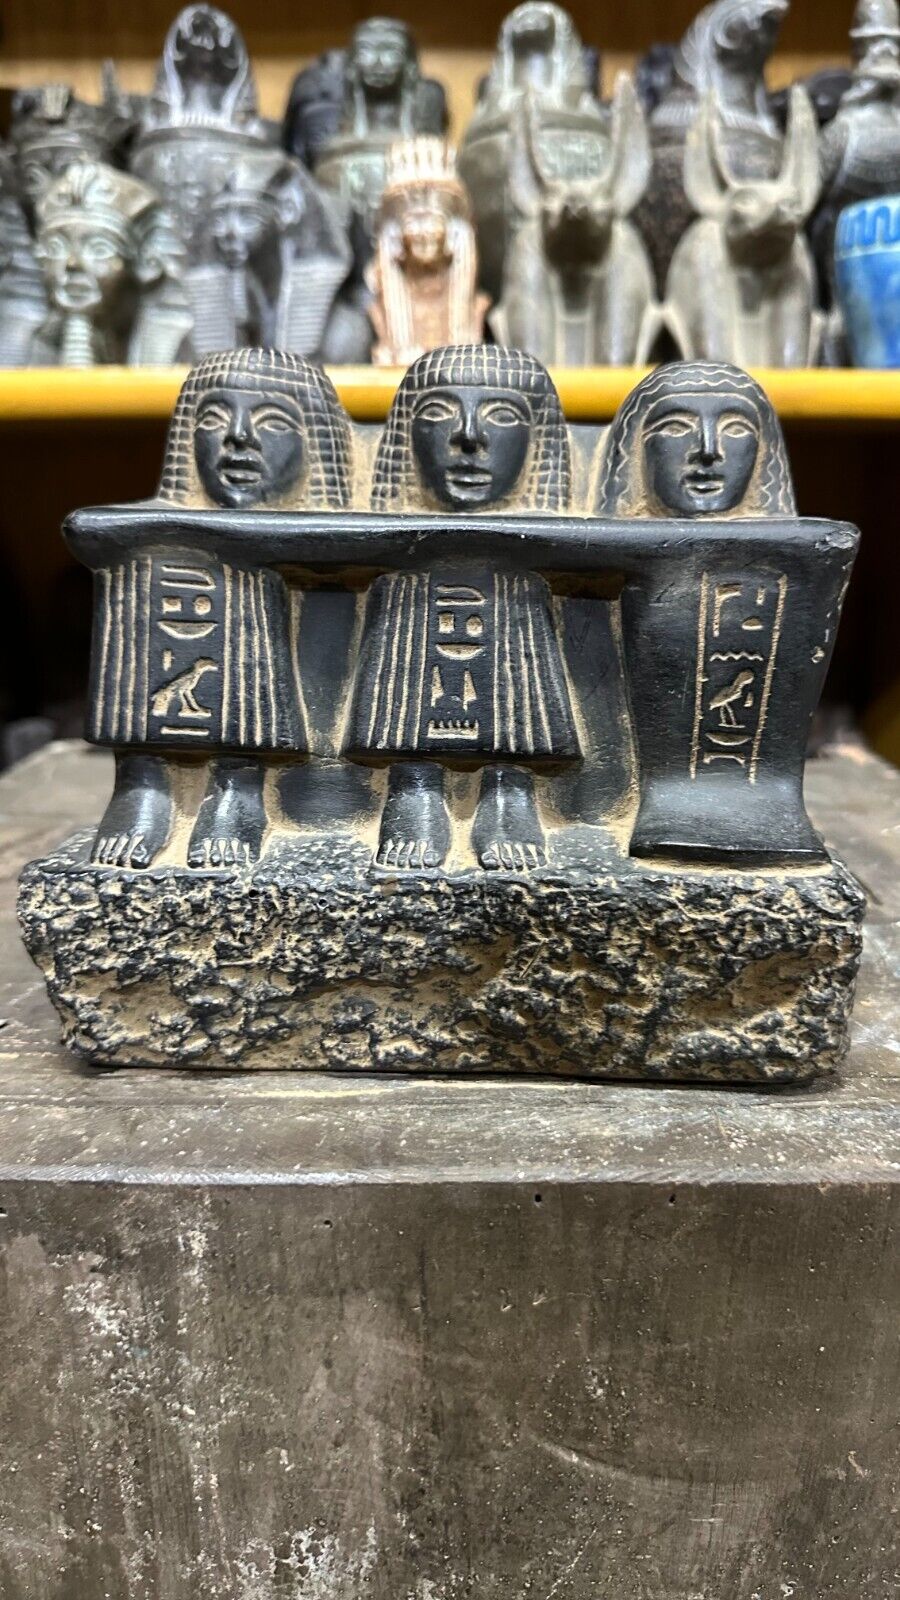 Rare Ancient Egyptian Antiquities Of Statue The Family Group of Three Unique BC